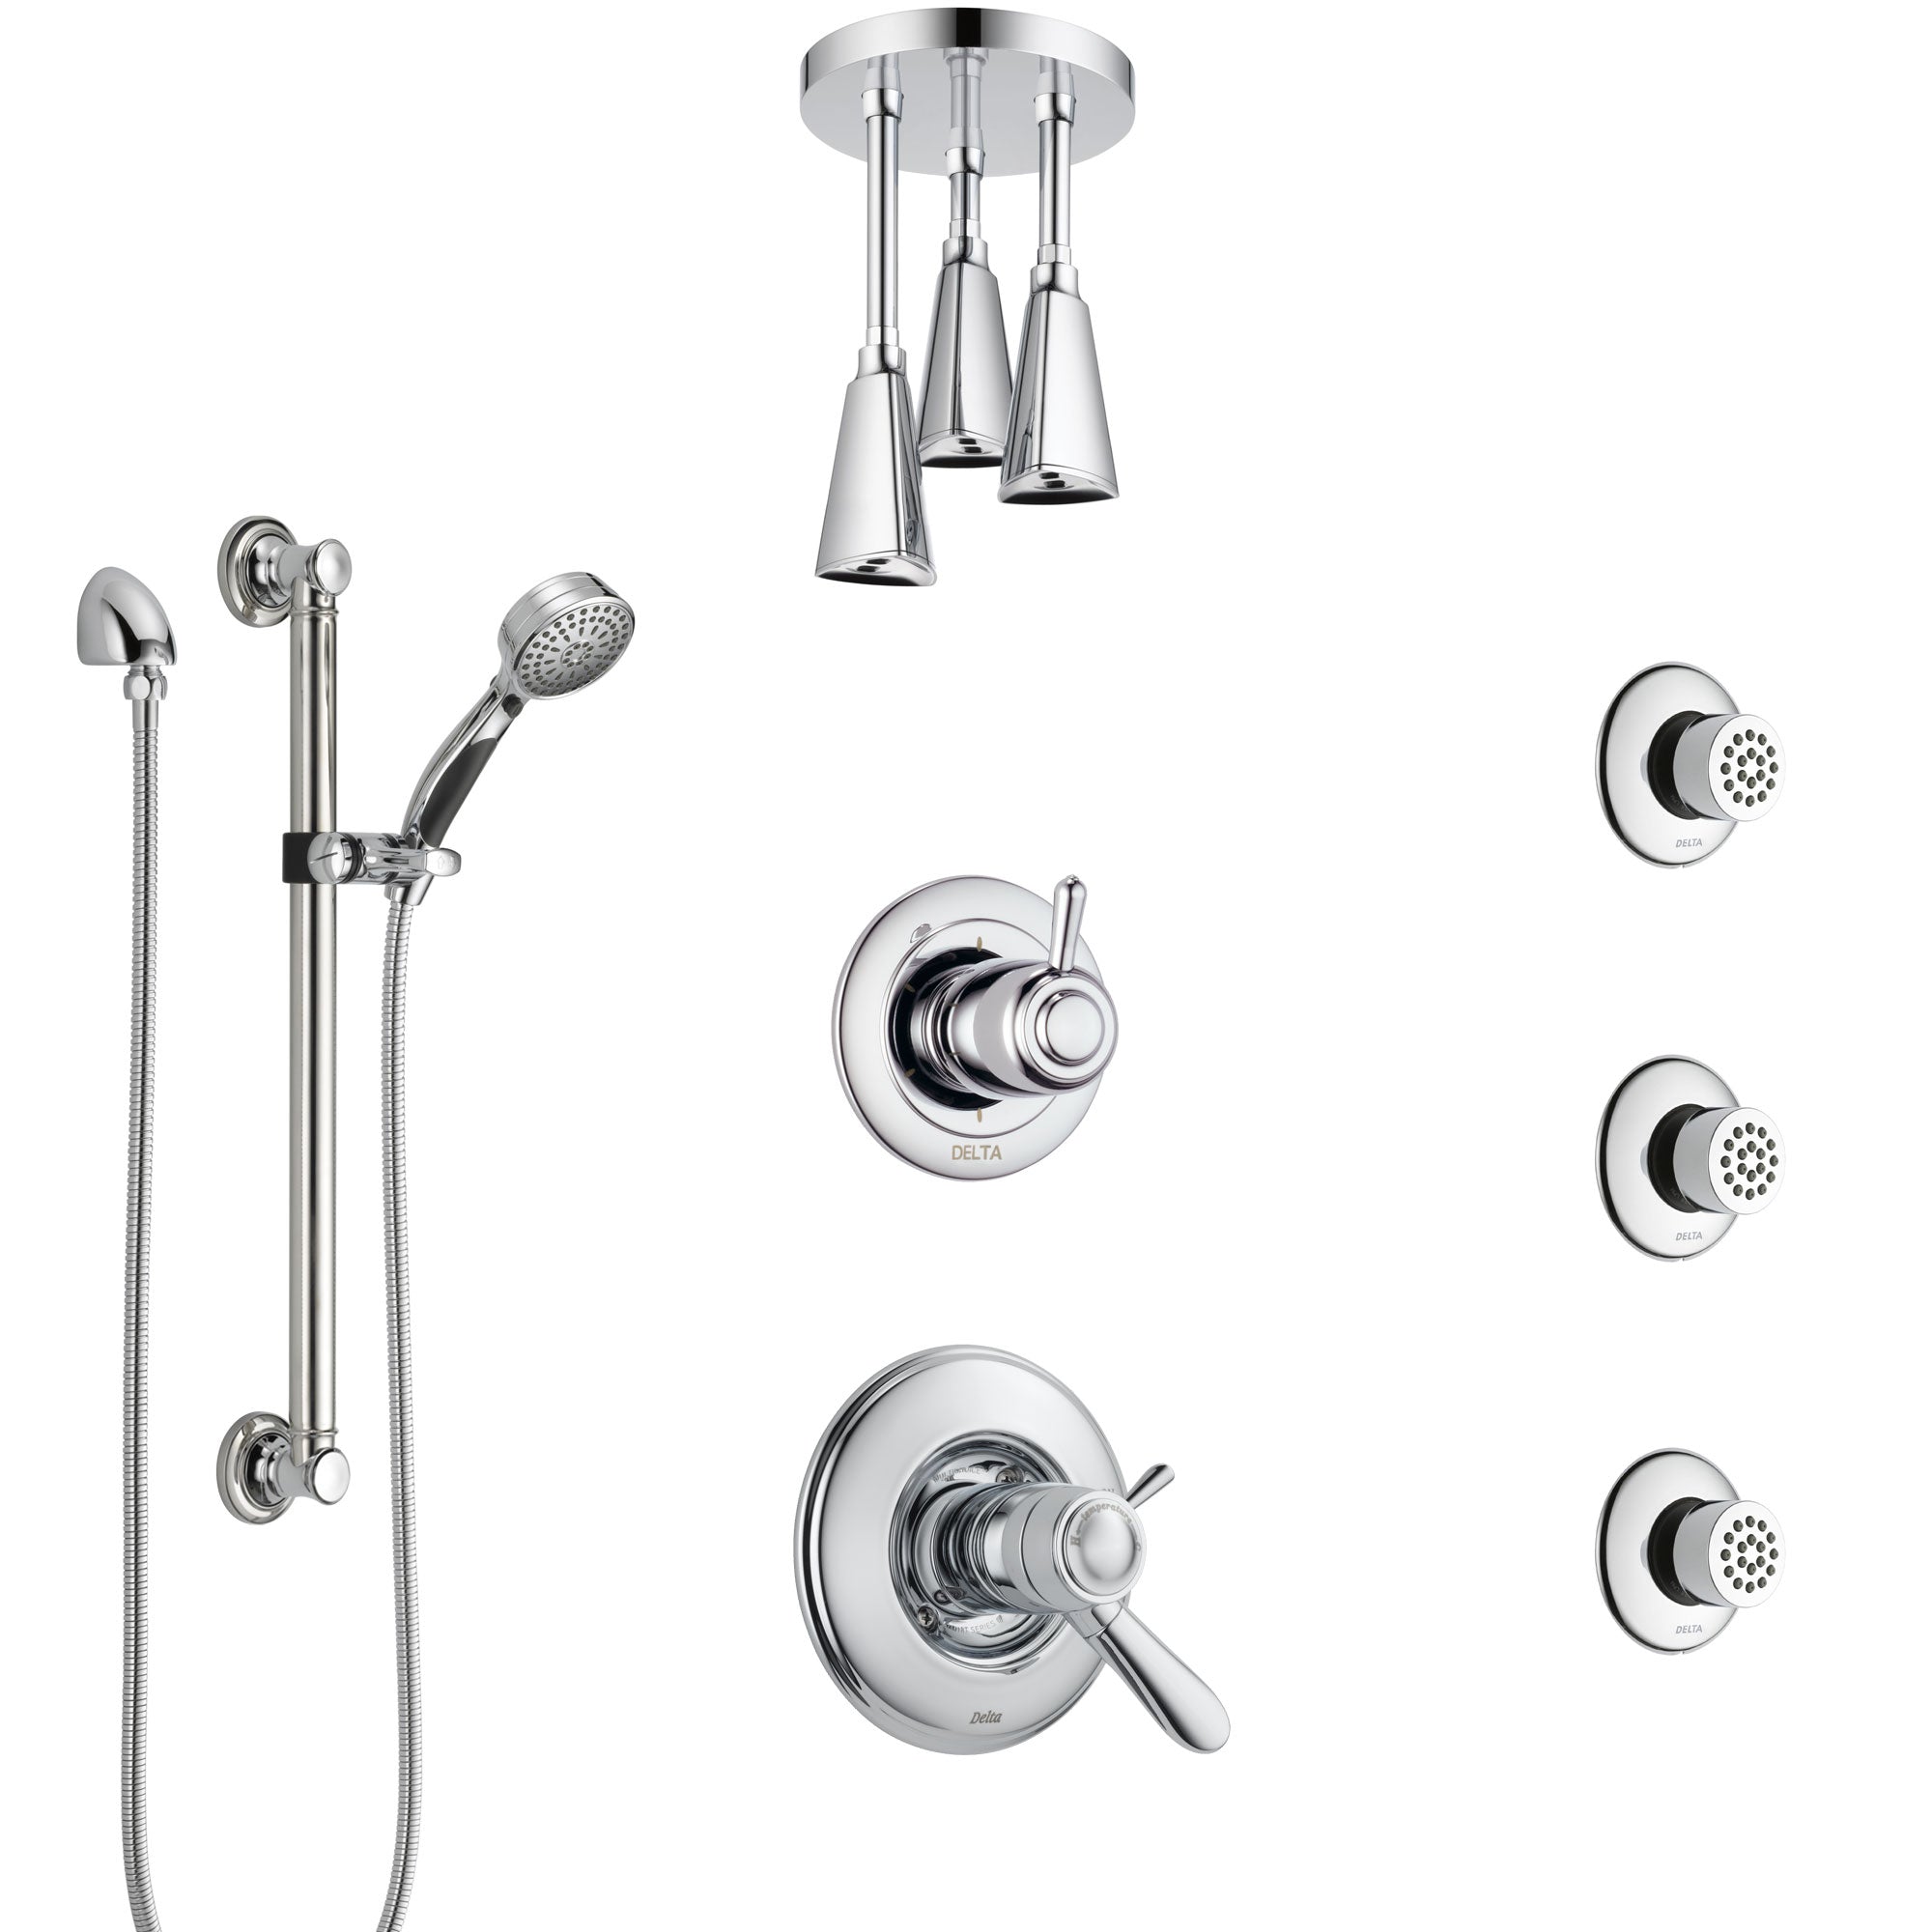 Delta Lahara Chrome Shower System with Dual Thermostatic Control, Diverter, Ceiling Showerhead, 3 Body Sprays, and Grab Bar Hand Shower SS17T3822